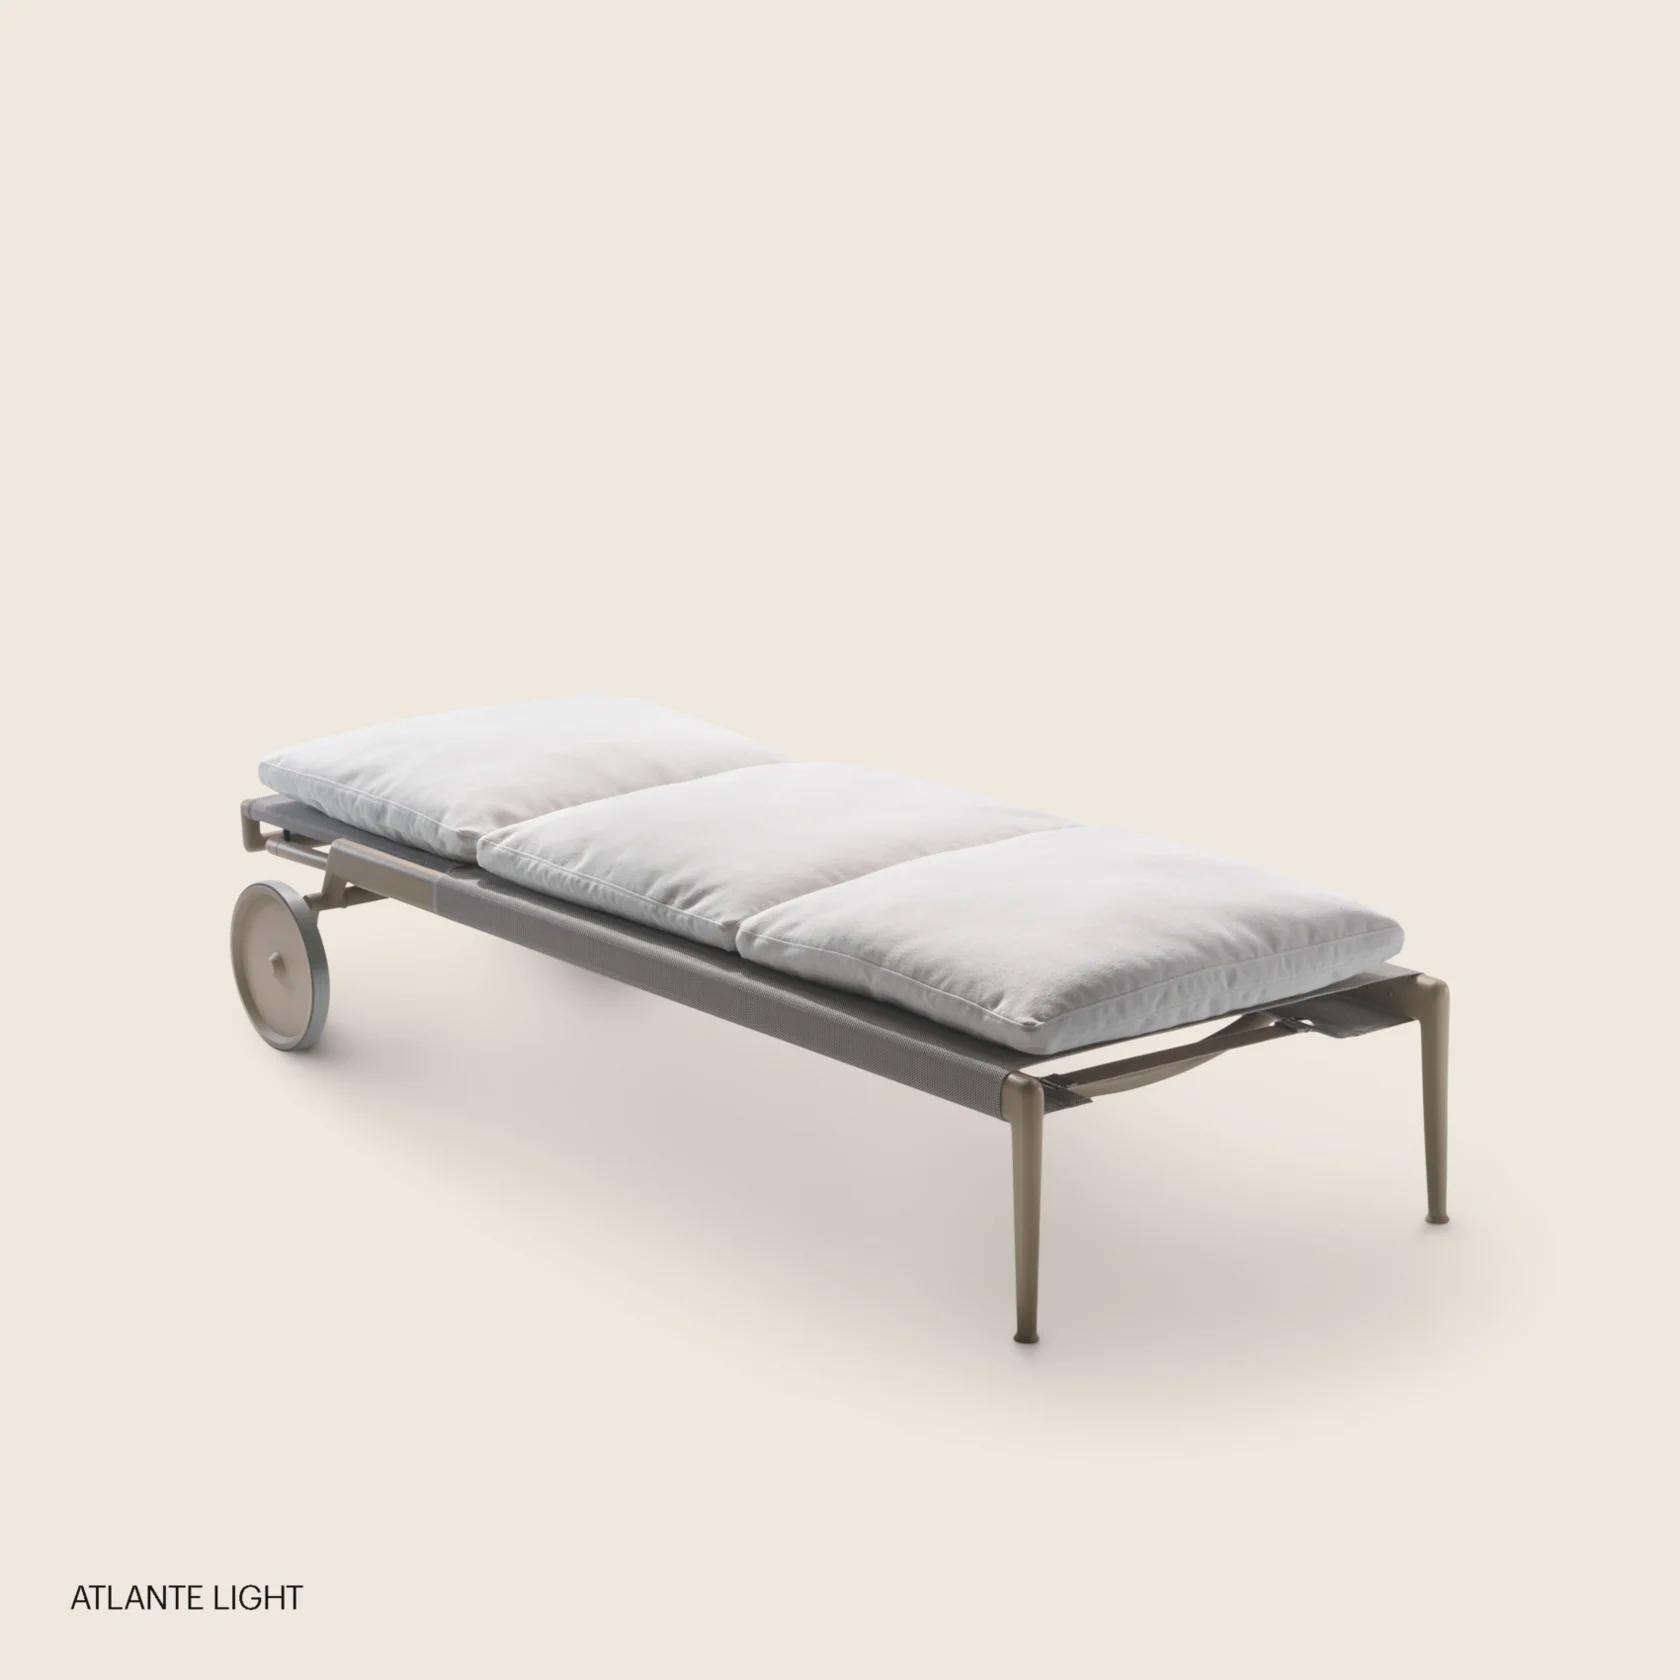 02A4G9_ATLANTE LIGHT_DAYBED_02_dida.png